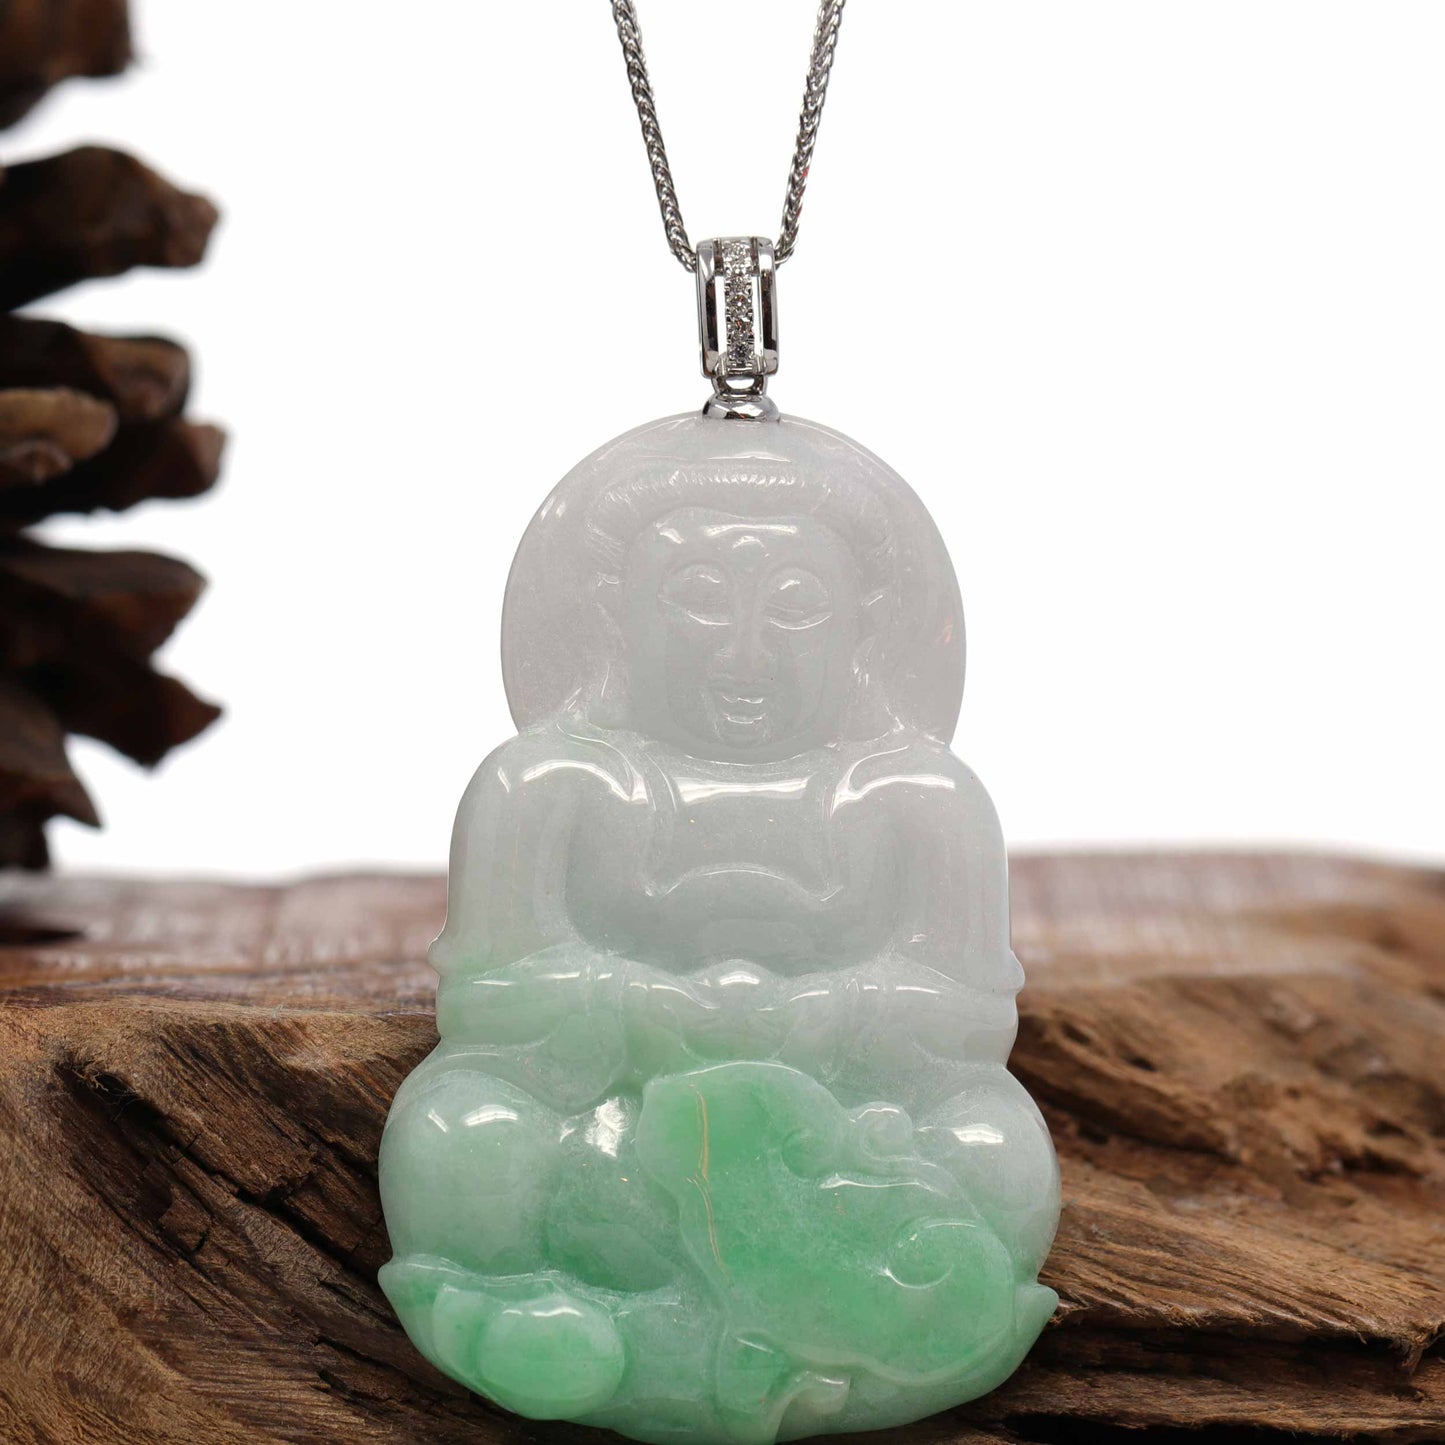 14k White Gold "Goddess of Compassion" Genuine Green Jadeite Jade Guanyin Necklace With Gold Diamond Bail